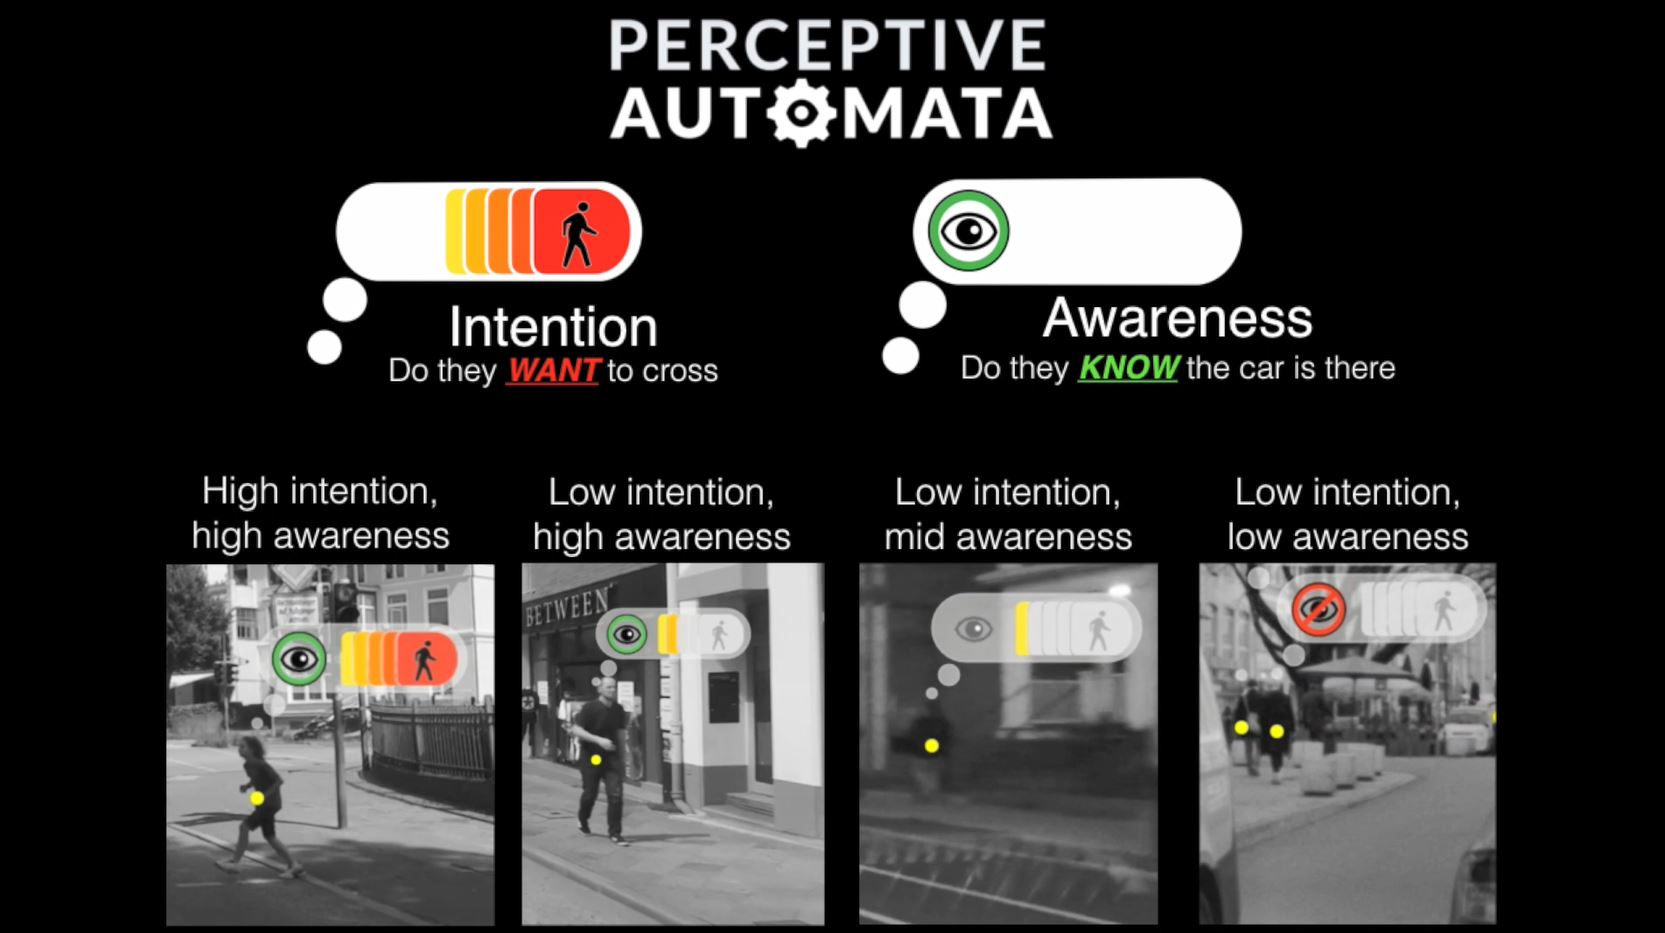 Hyundai CRADLE Invests in Perceptive Automata to Bring Human Intuition Software to Self-Driving Cars